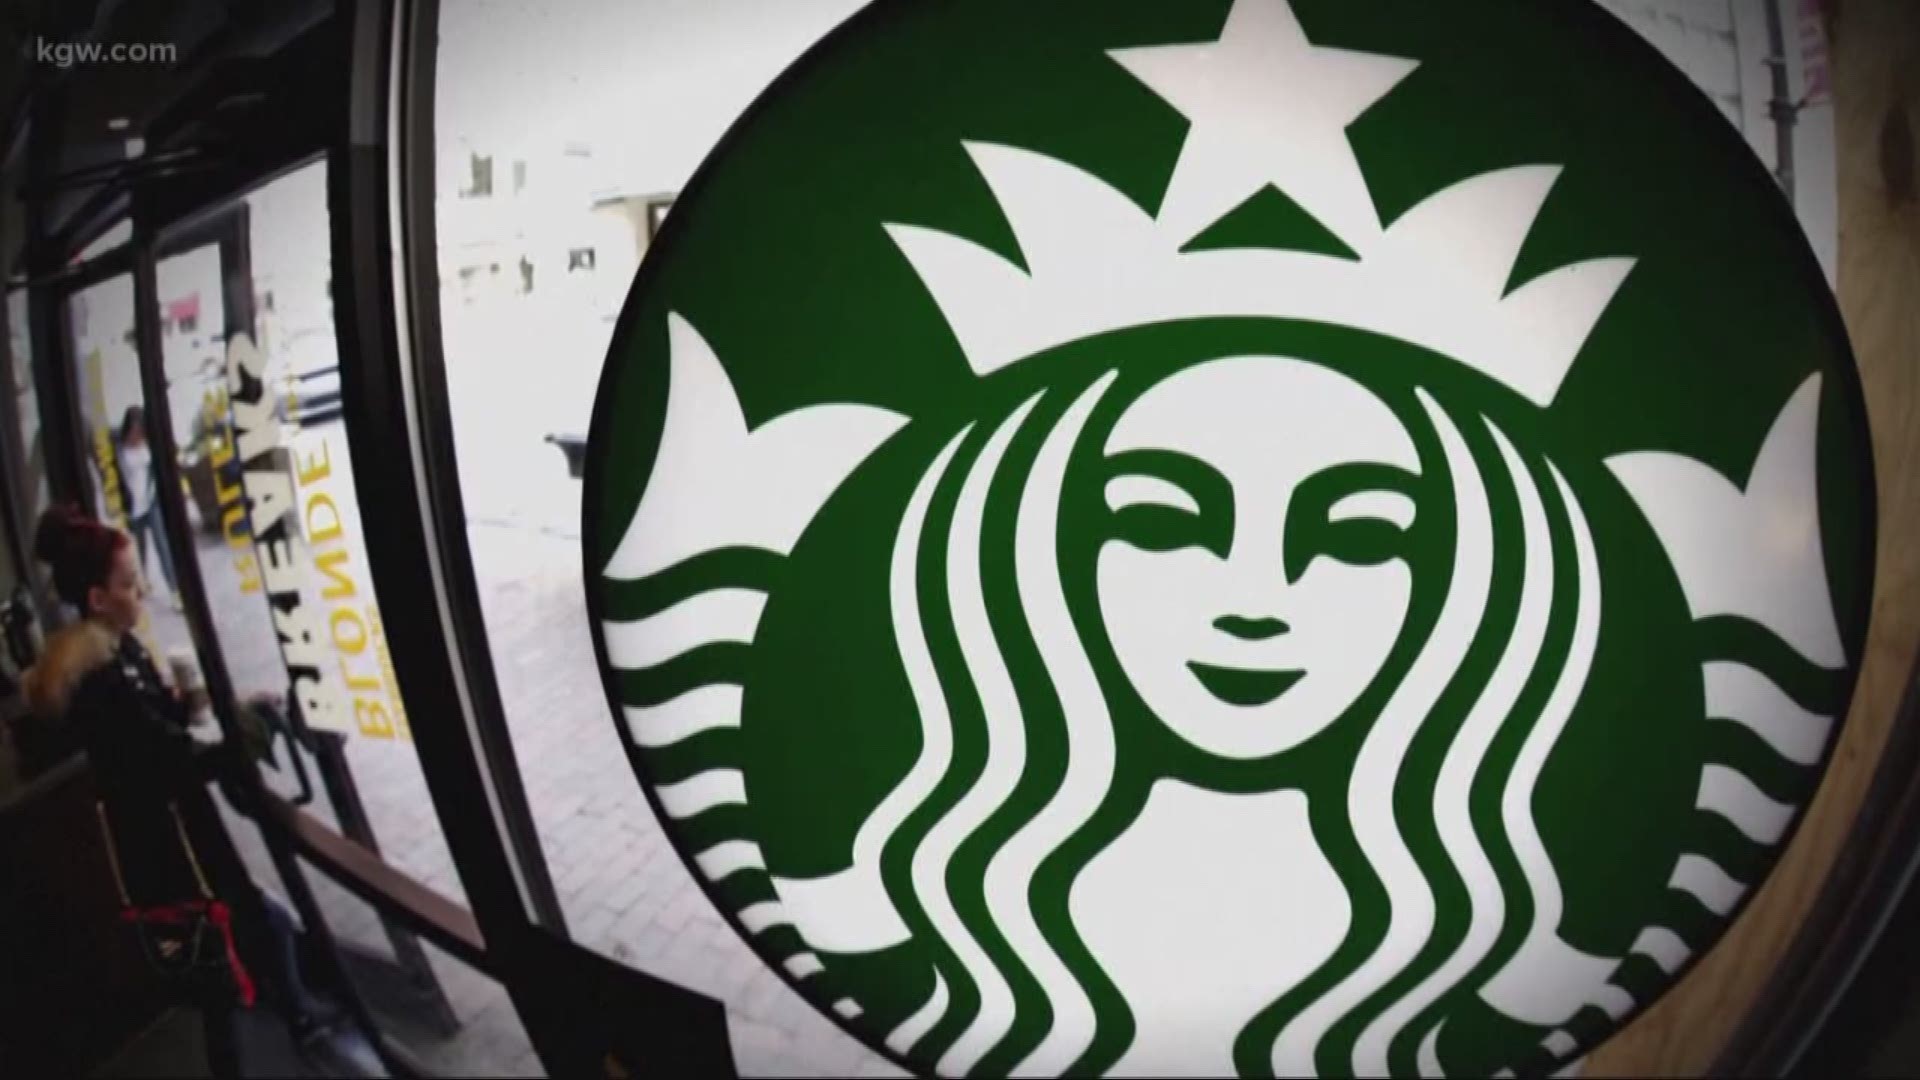 Starbucks allows people to use the bathroom in stores.